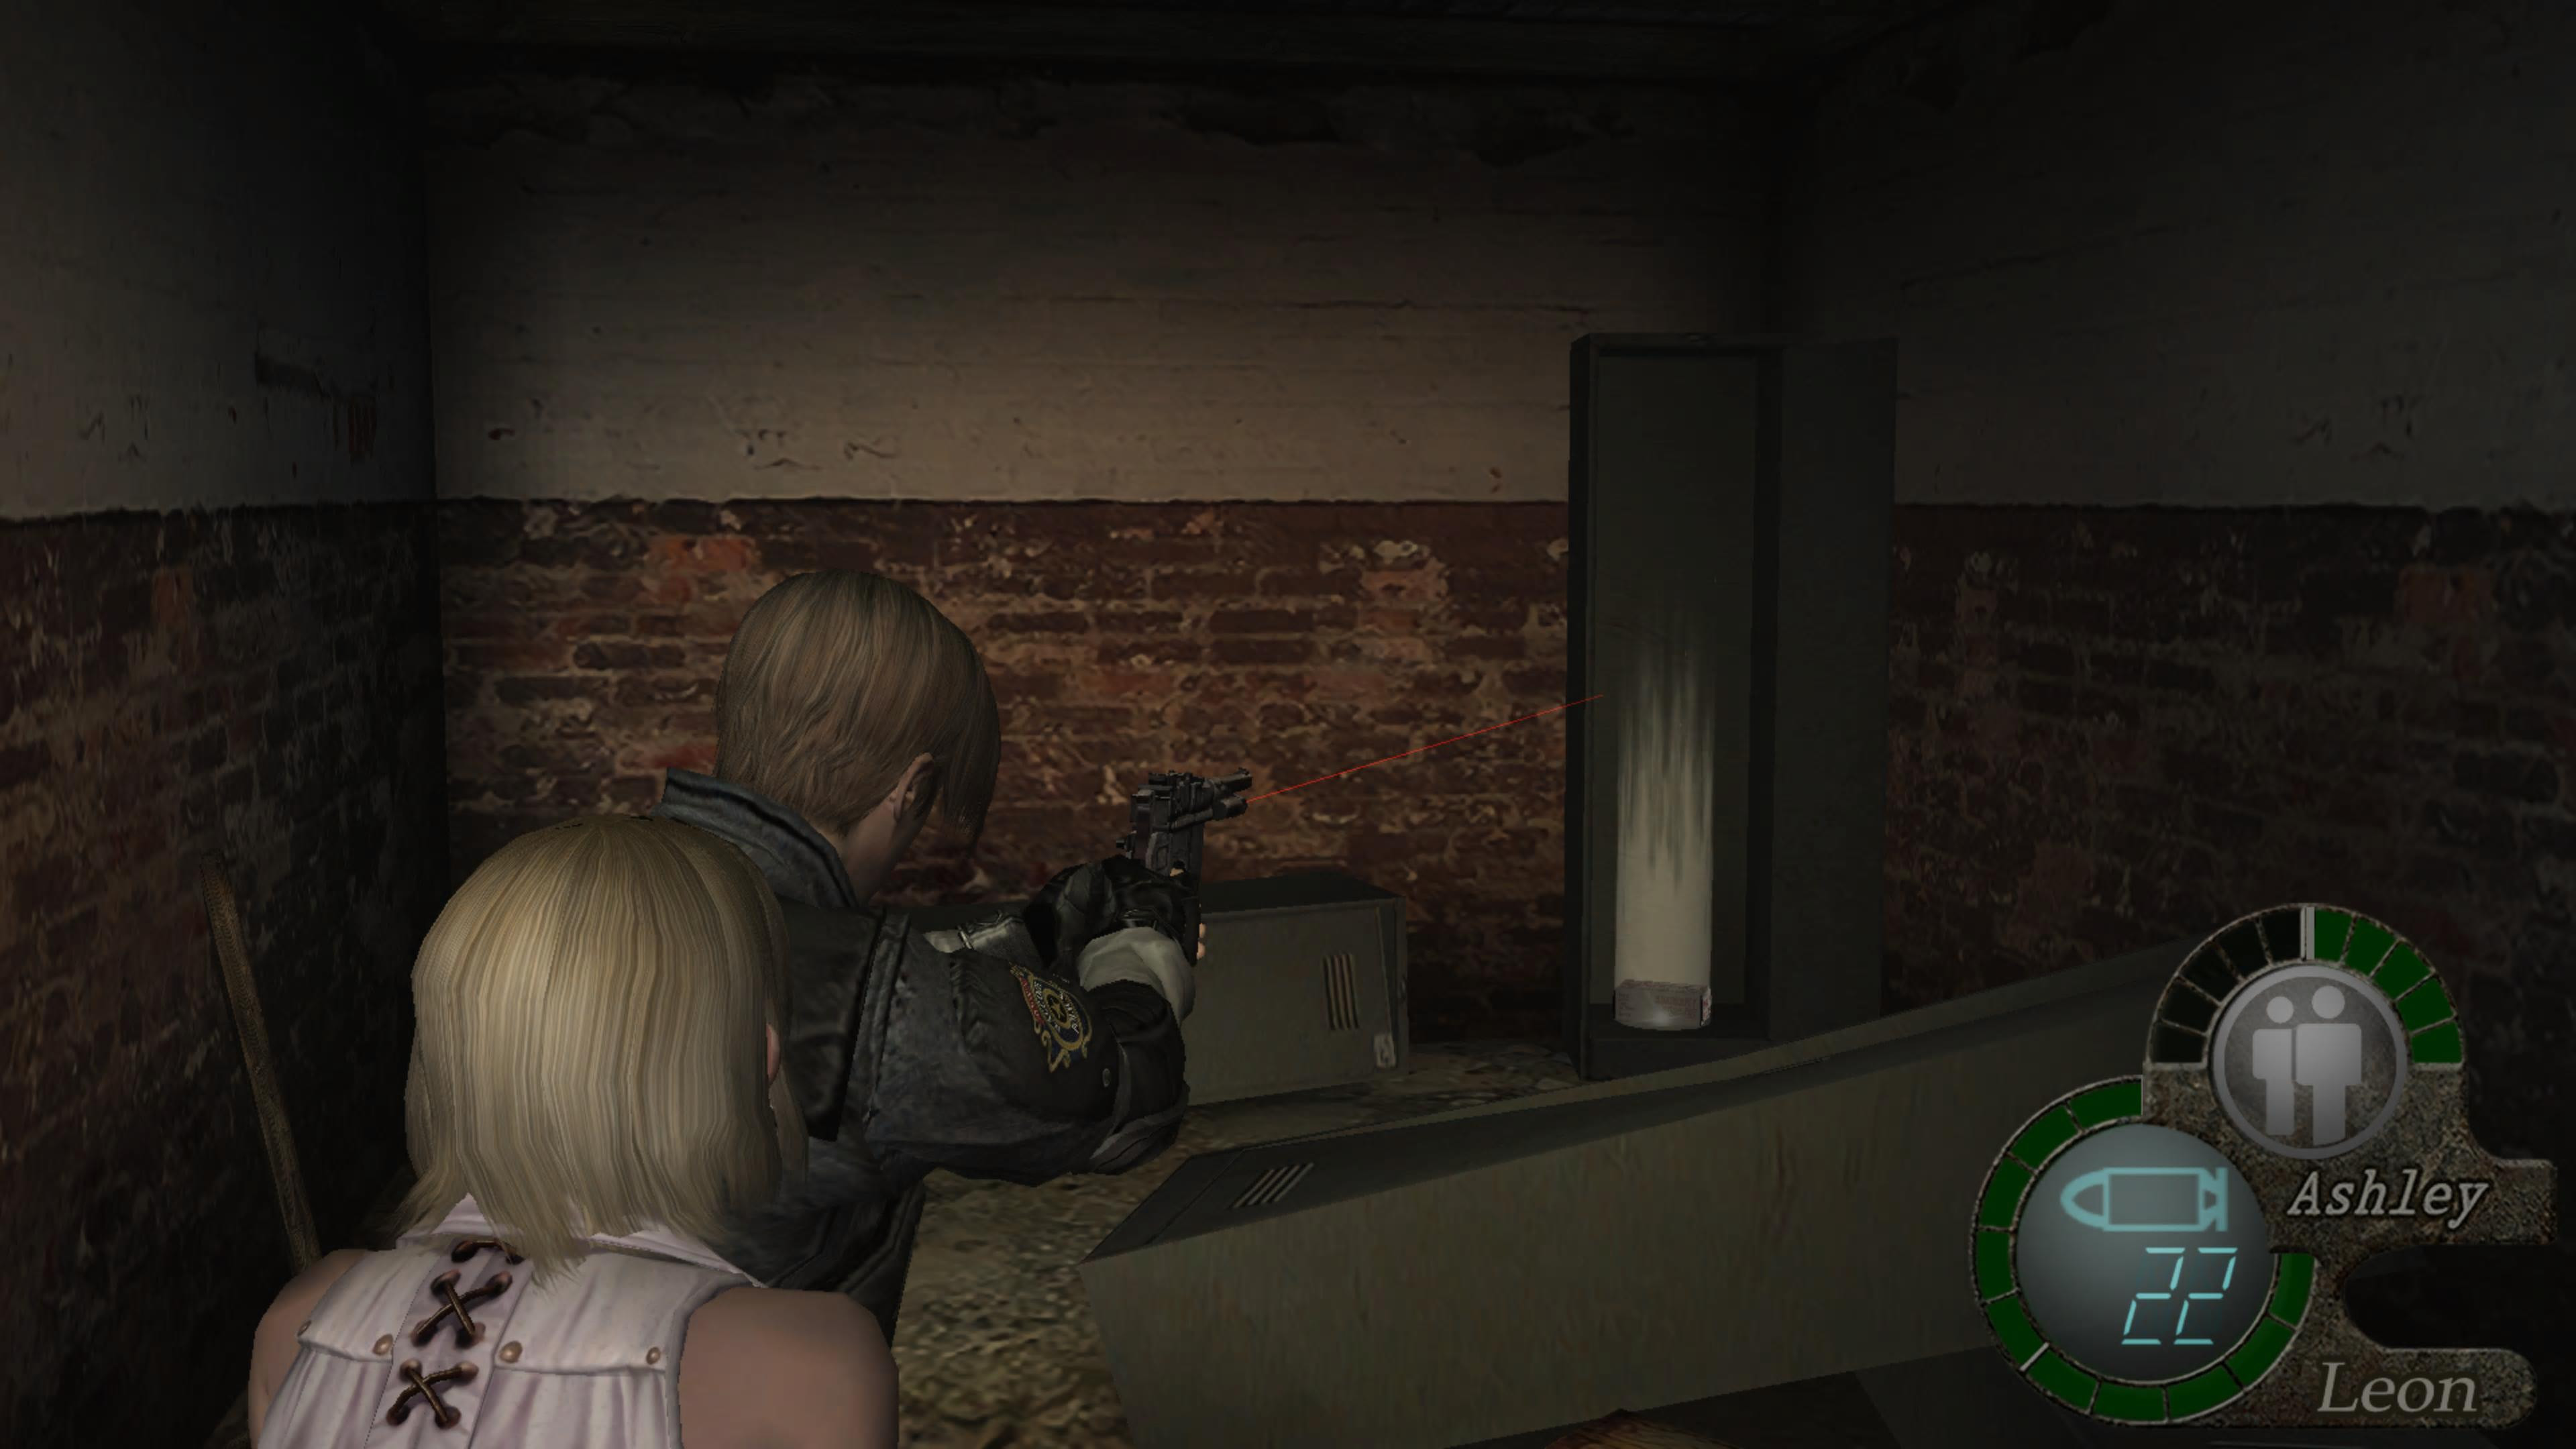 Resident Evil 4: Here Is When the Game Makes Ashley Break the 4th